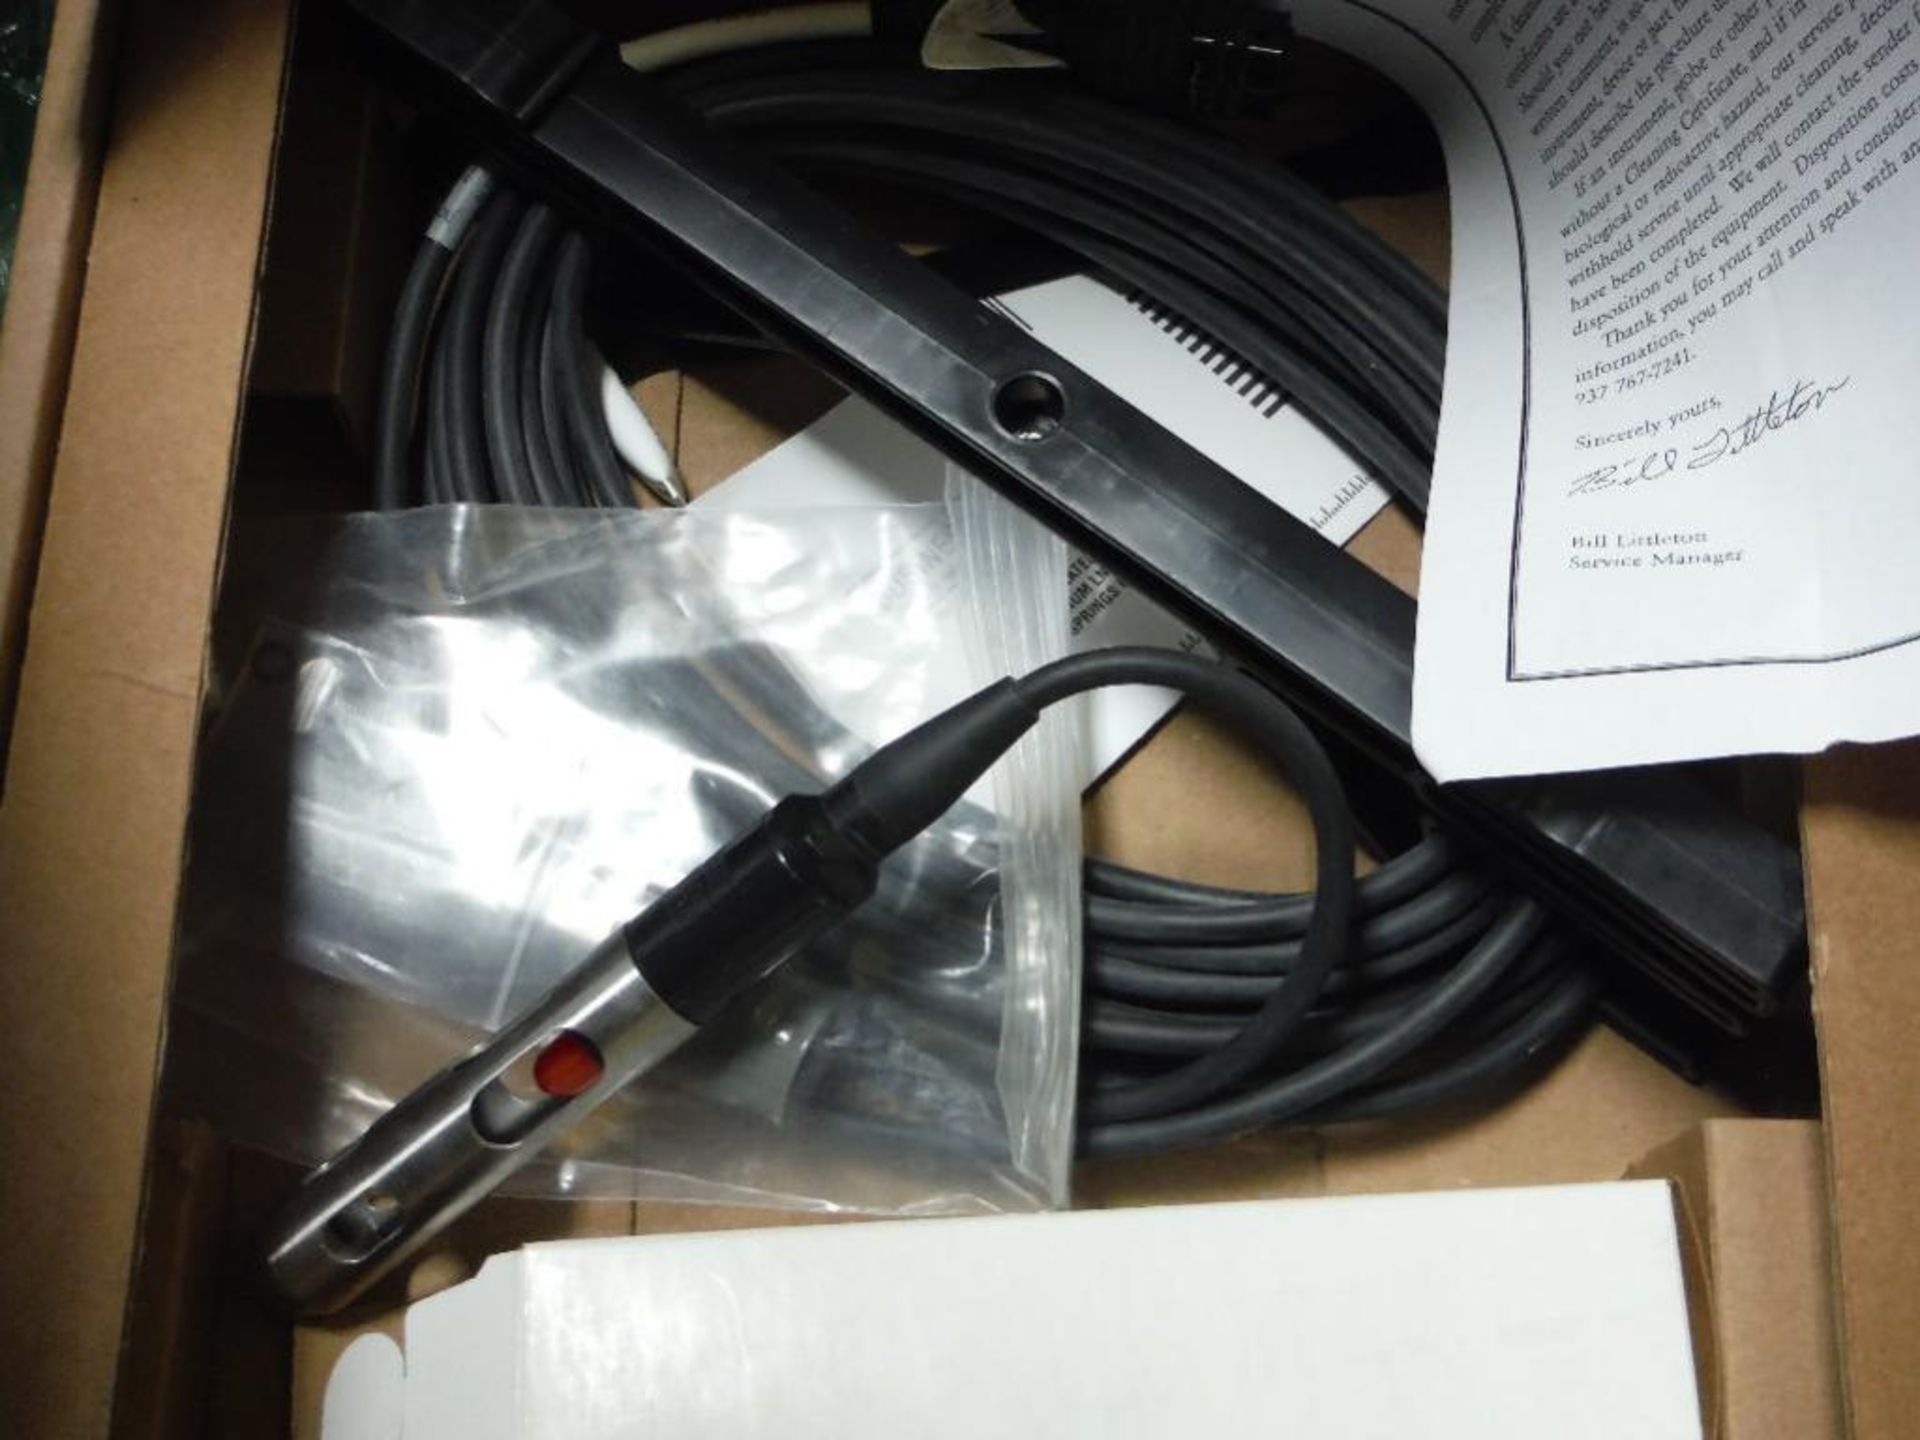 box ink jet cabling and heads. - RIGGING FEE FOR DOMESTIC TRANSPORT $25